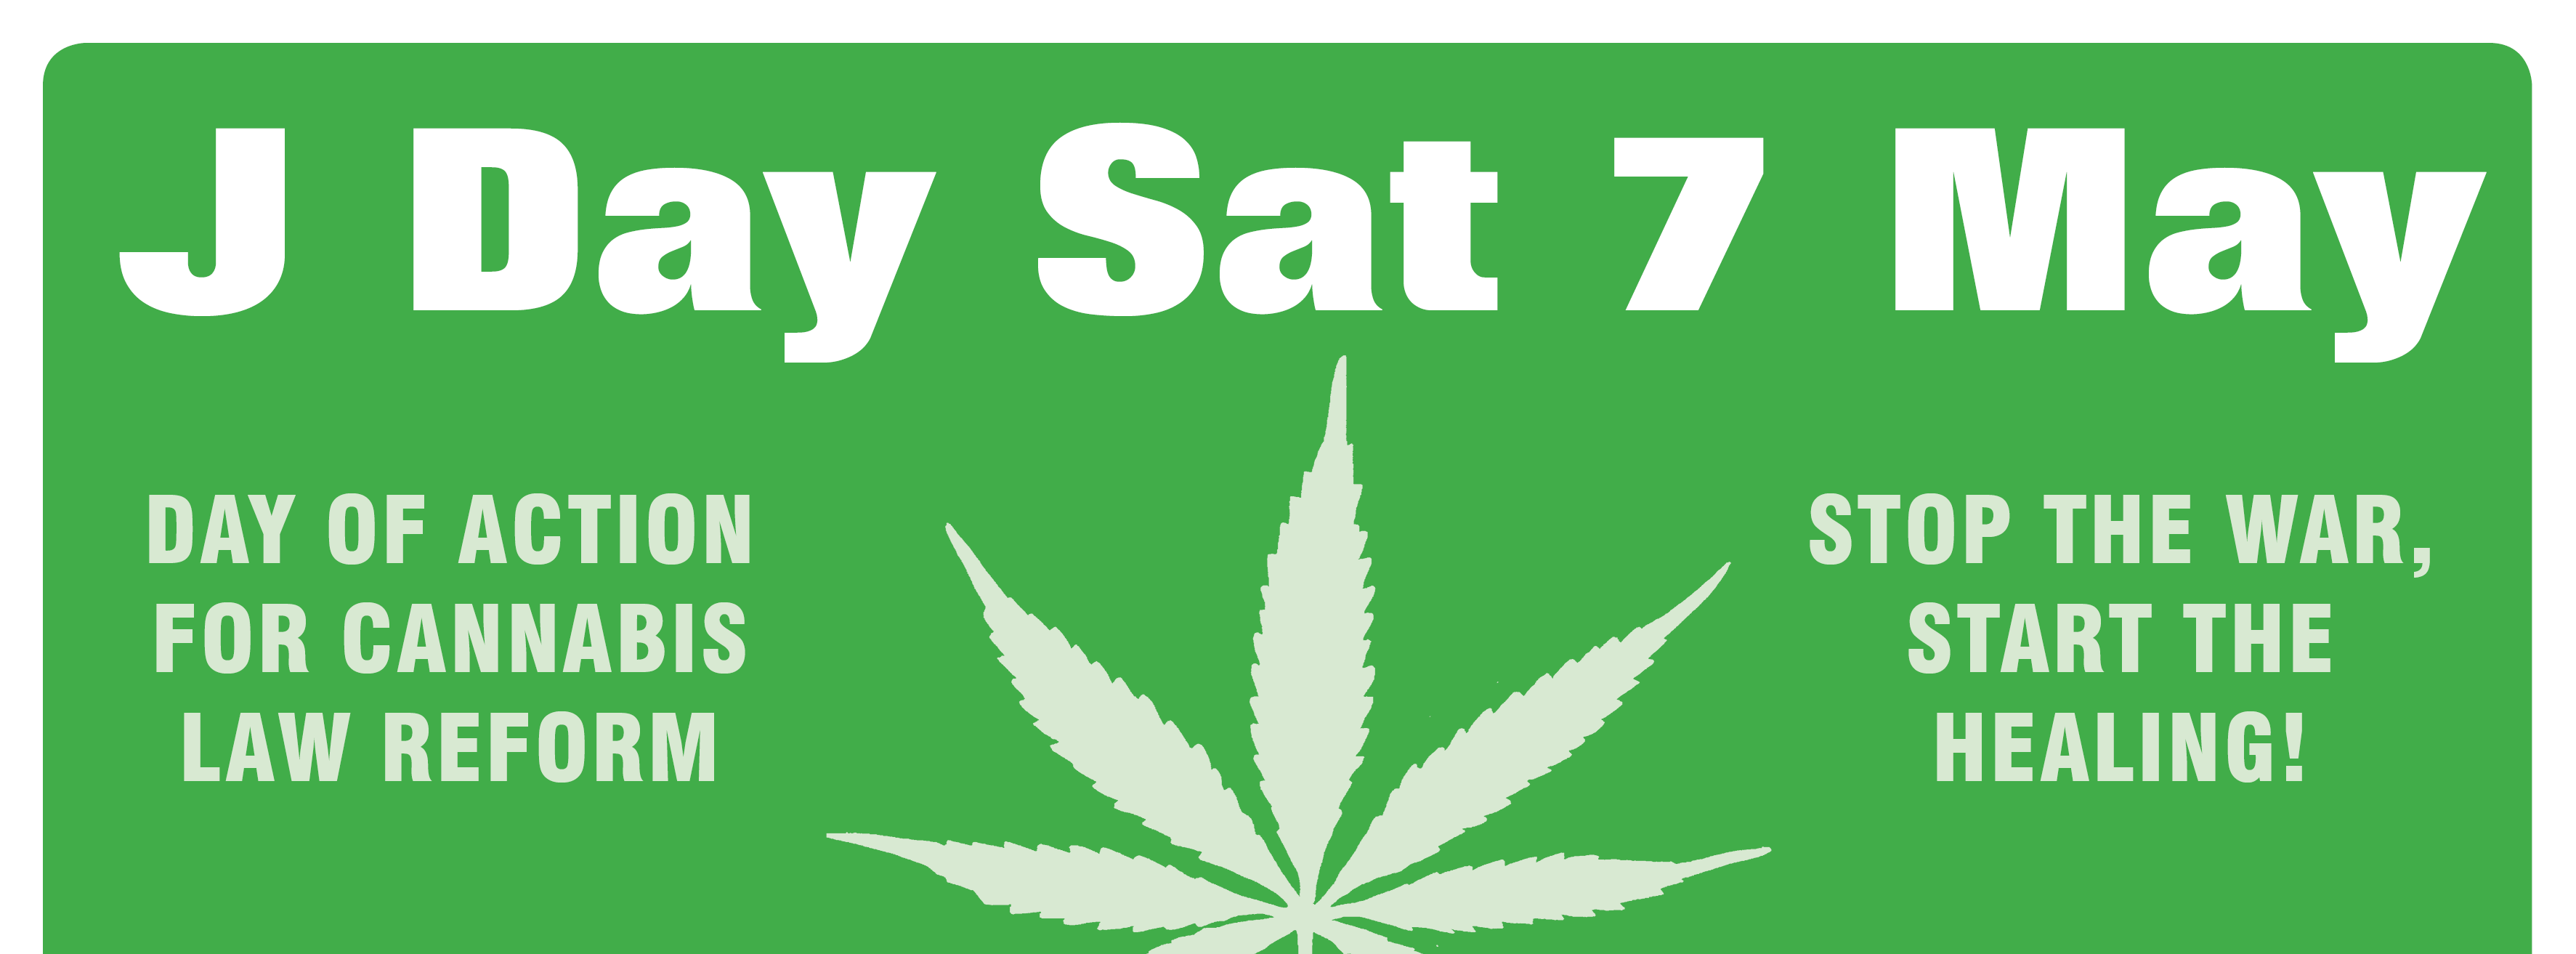 National Day of Action for Cannabis Law Reform